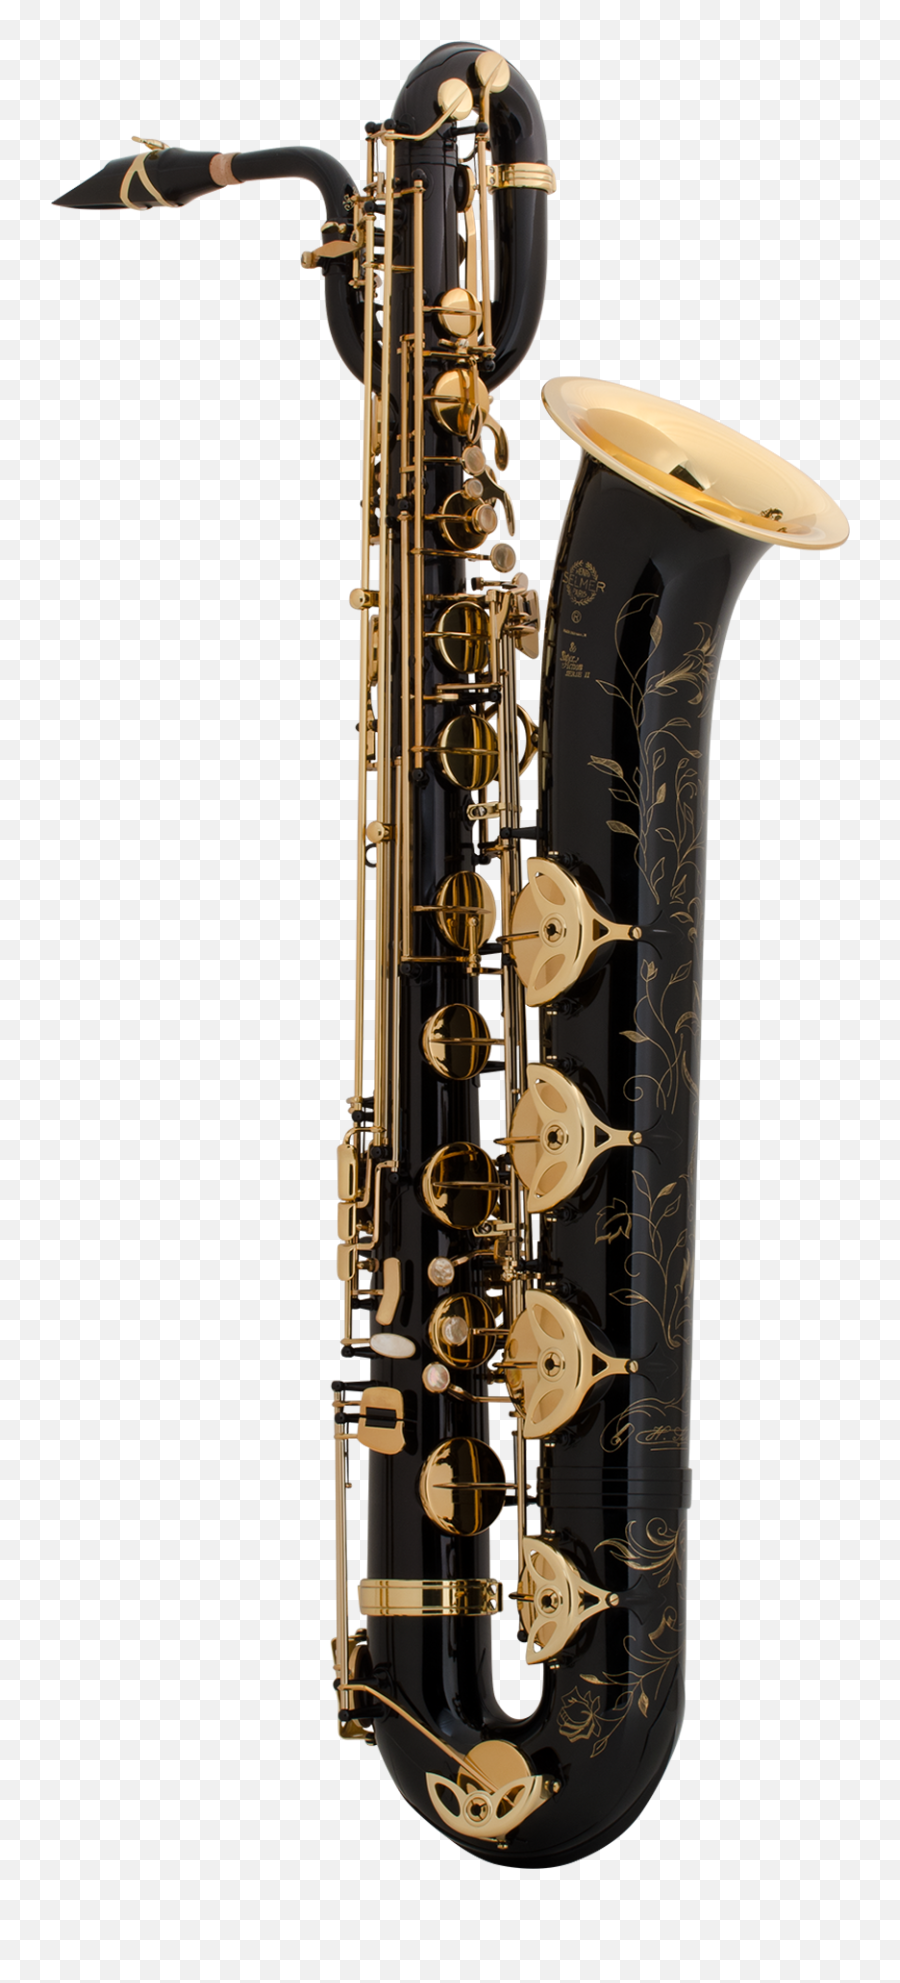 Download Saxophone Png Image With No Background - Pngkeycom Saxophone,Saxophone Png